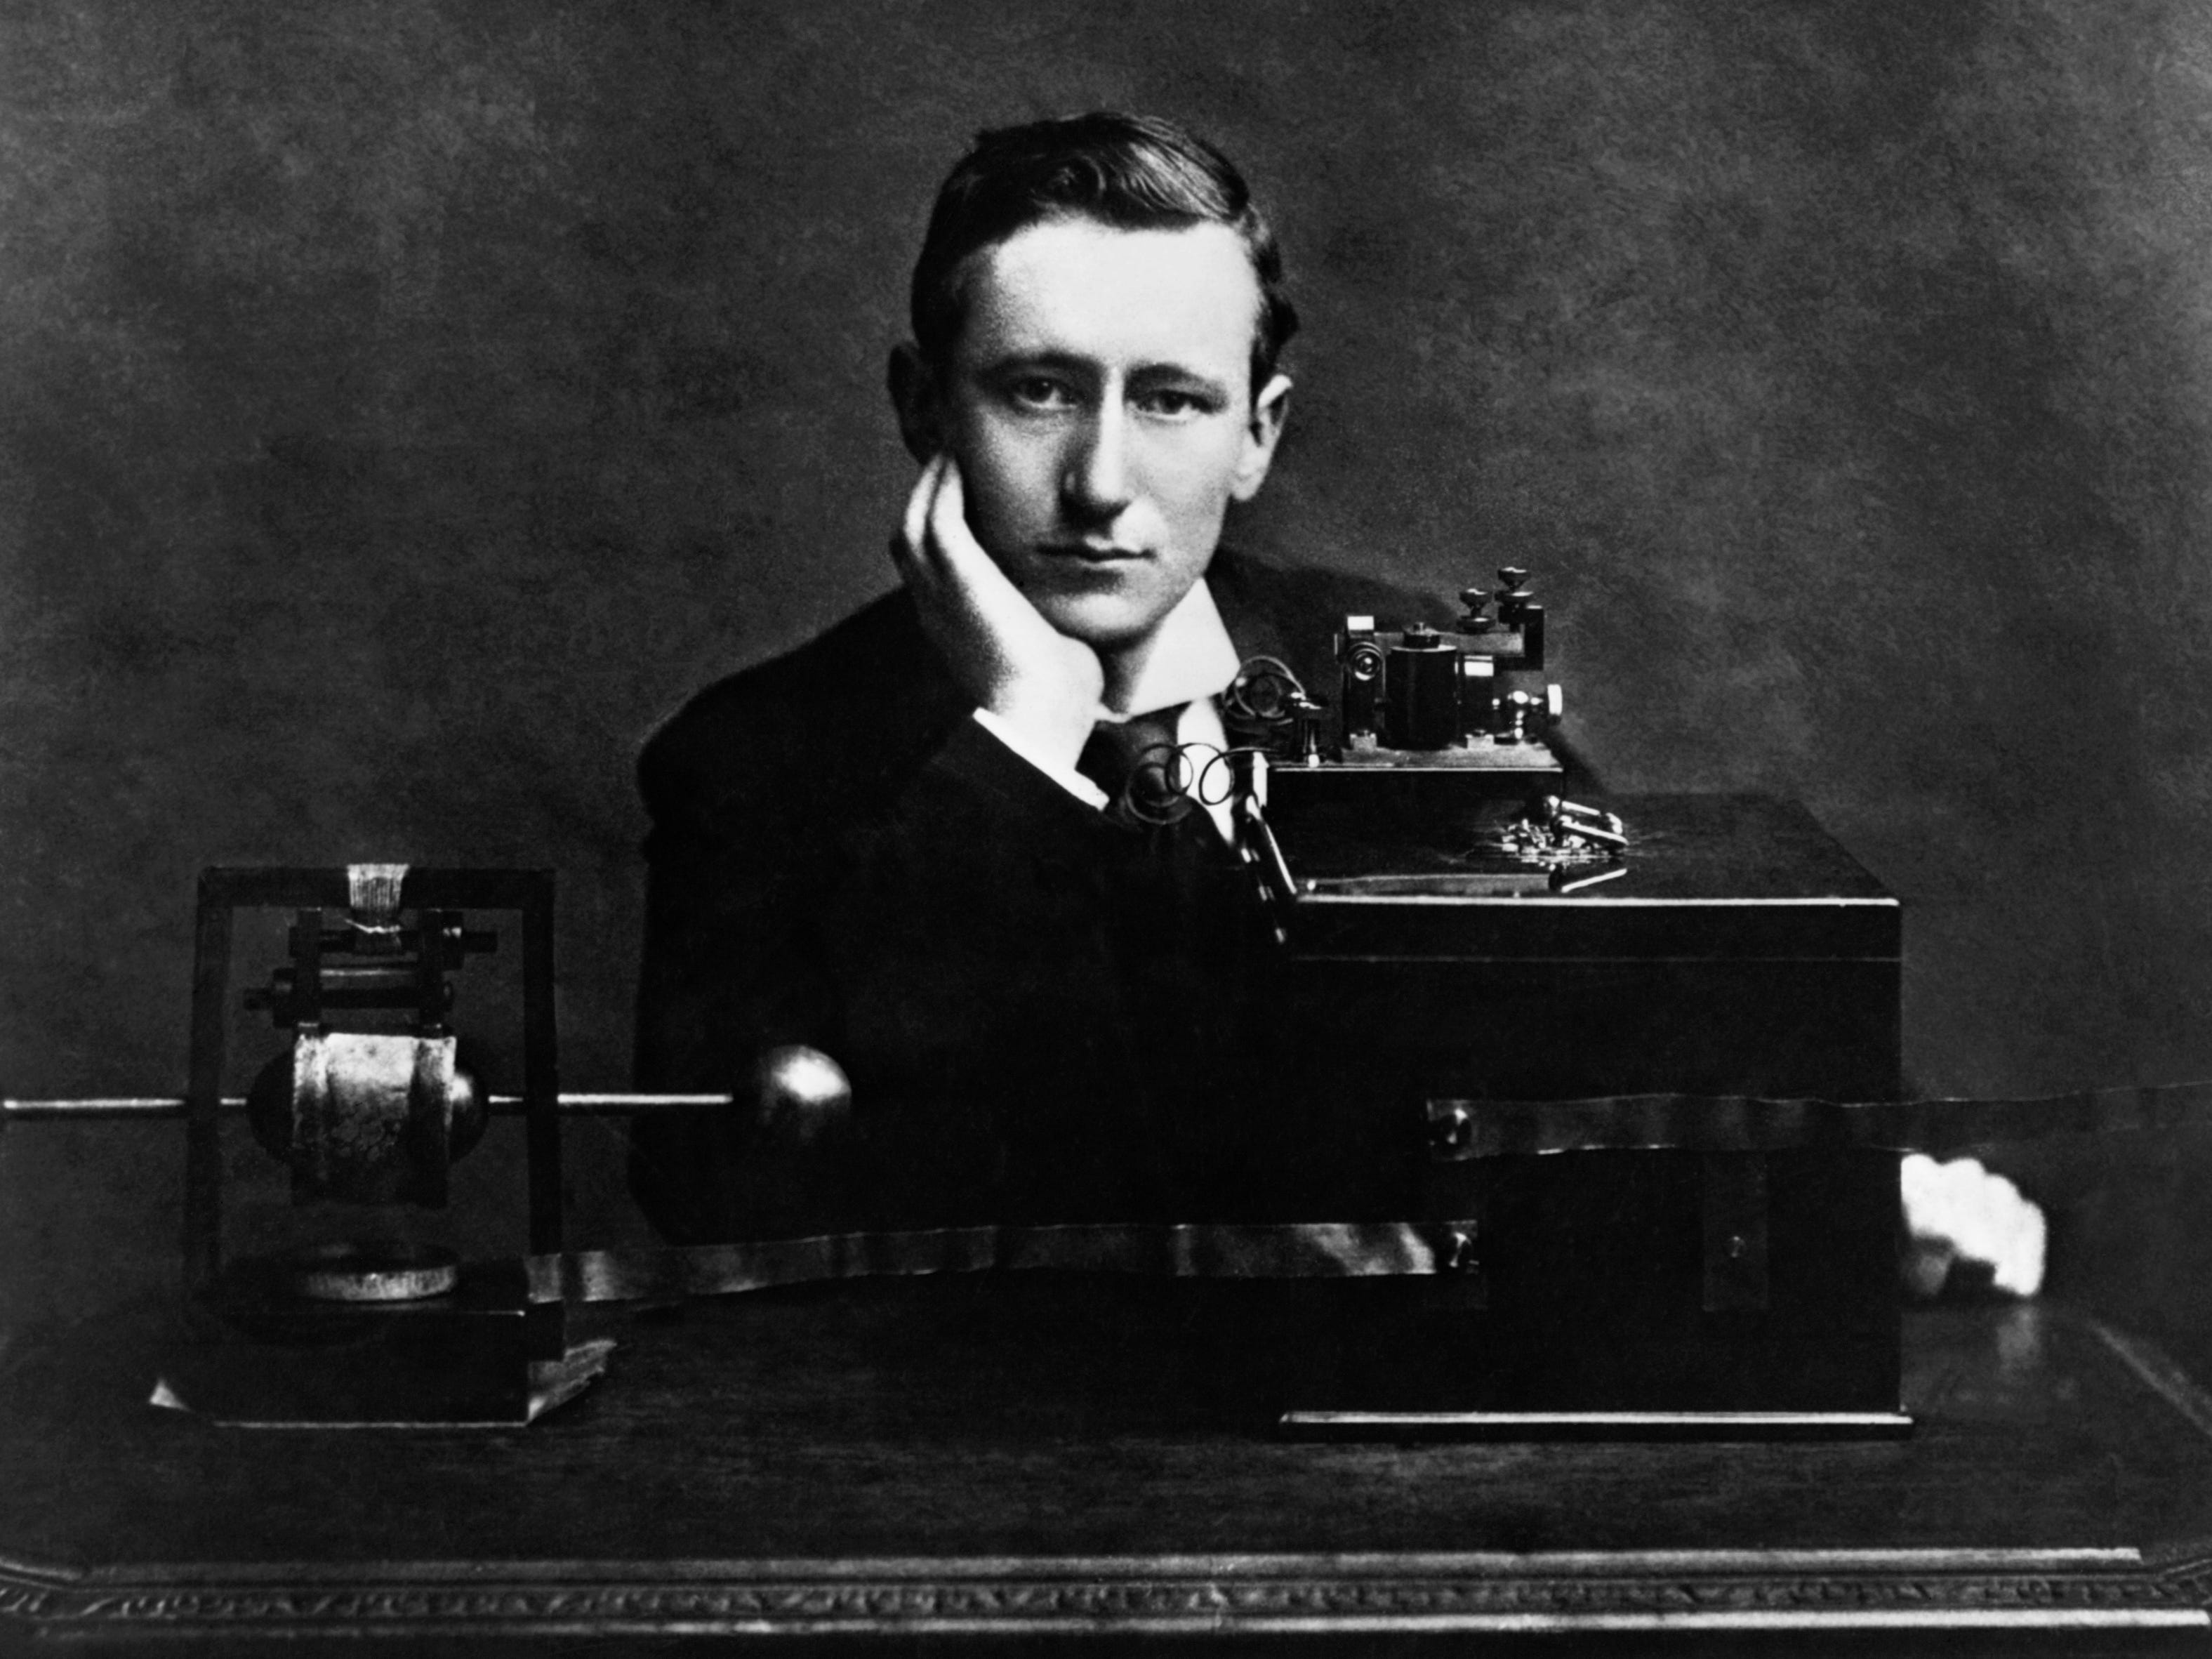 <p>You might know that <a href="https://www.sciencemuseum.org.uk/objects-and-stories/titanic-marconi-and-wireless-telegraph">Marconi was considered a hero</a> after the sinking of the Titanic because, due to his invention of the wireless radio, the ships in the surrounding area knew where to look for the lifeboats.</p><p>But did you know that he was almost on board the ship himself? According to his daughter Degna's 1926 book, "<a href="https://archive.org/details/myfathermarconi010955mbp">My Father, Marconi</a>," he was offered a free ticket aboard the Titanic. But because his personal stenographer got seasick, Marconi opted to sail to the US on the Lusitania, because he trusted that ship's stenographer more than Titanic's.</p>